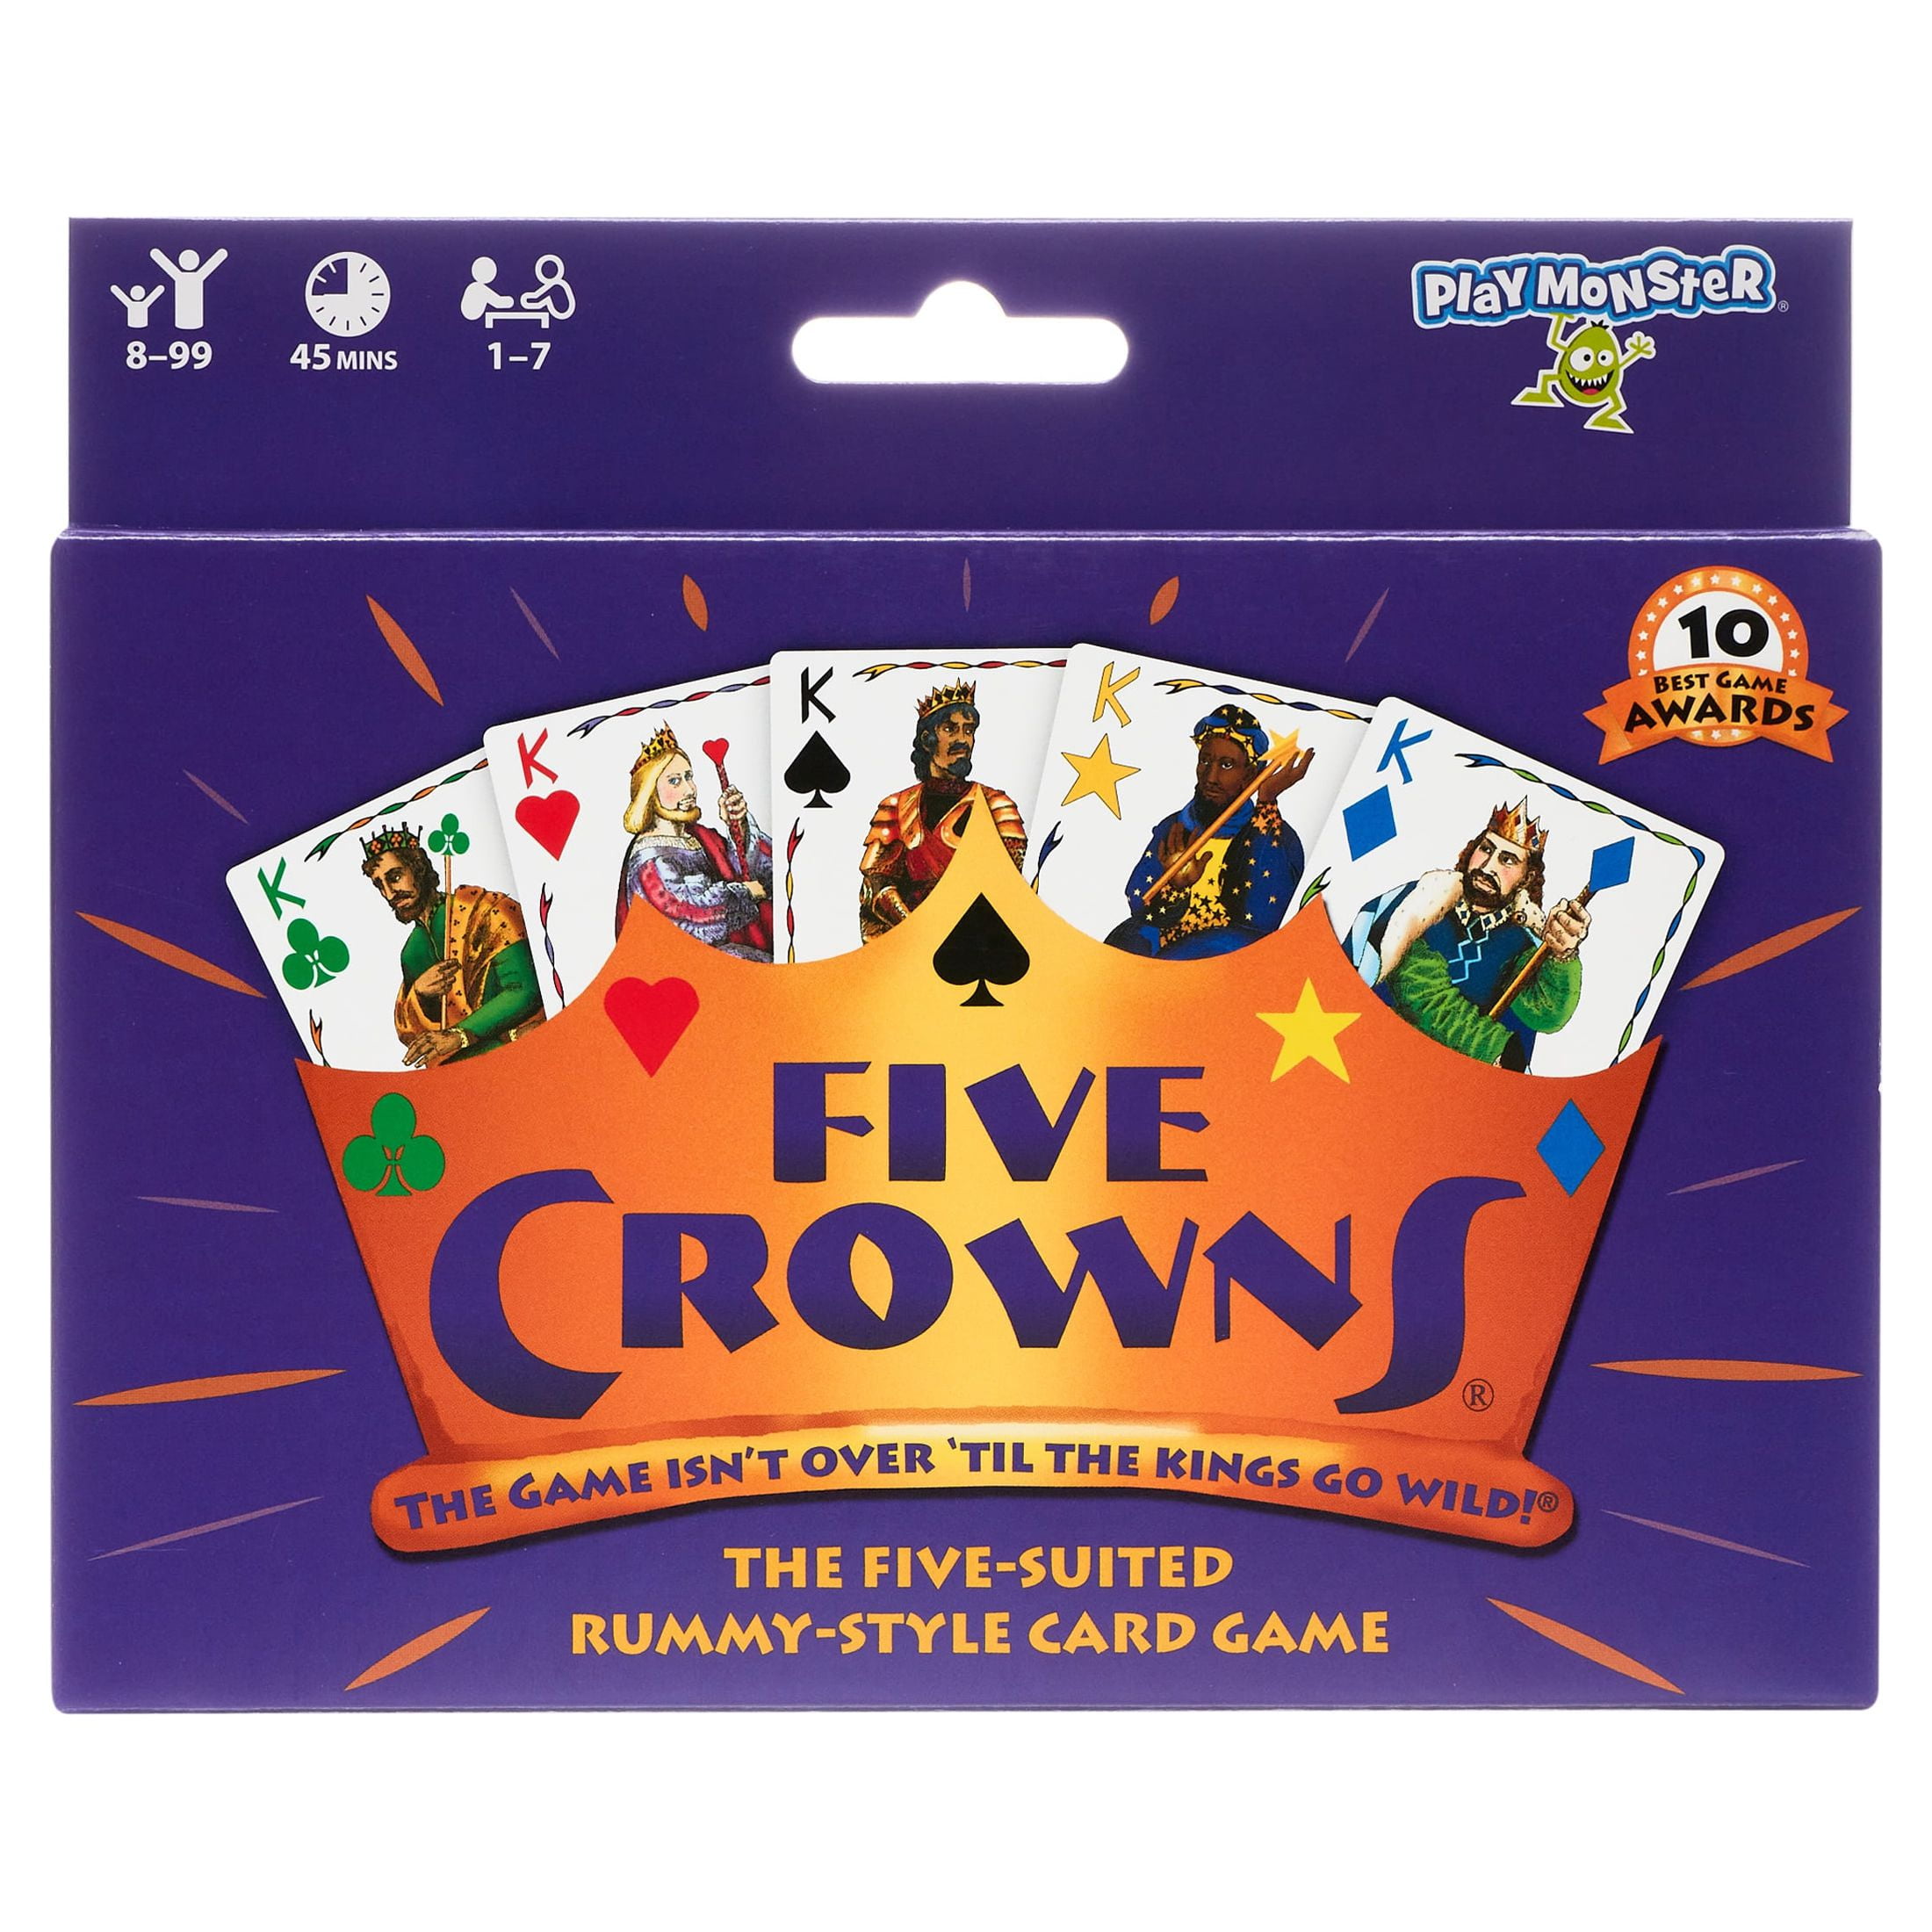 CARD Game for Kids